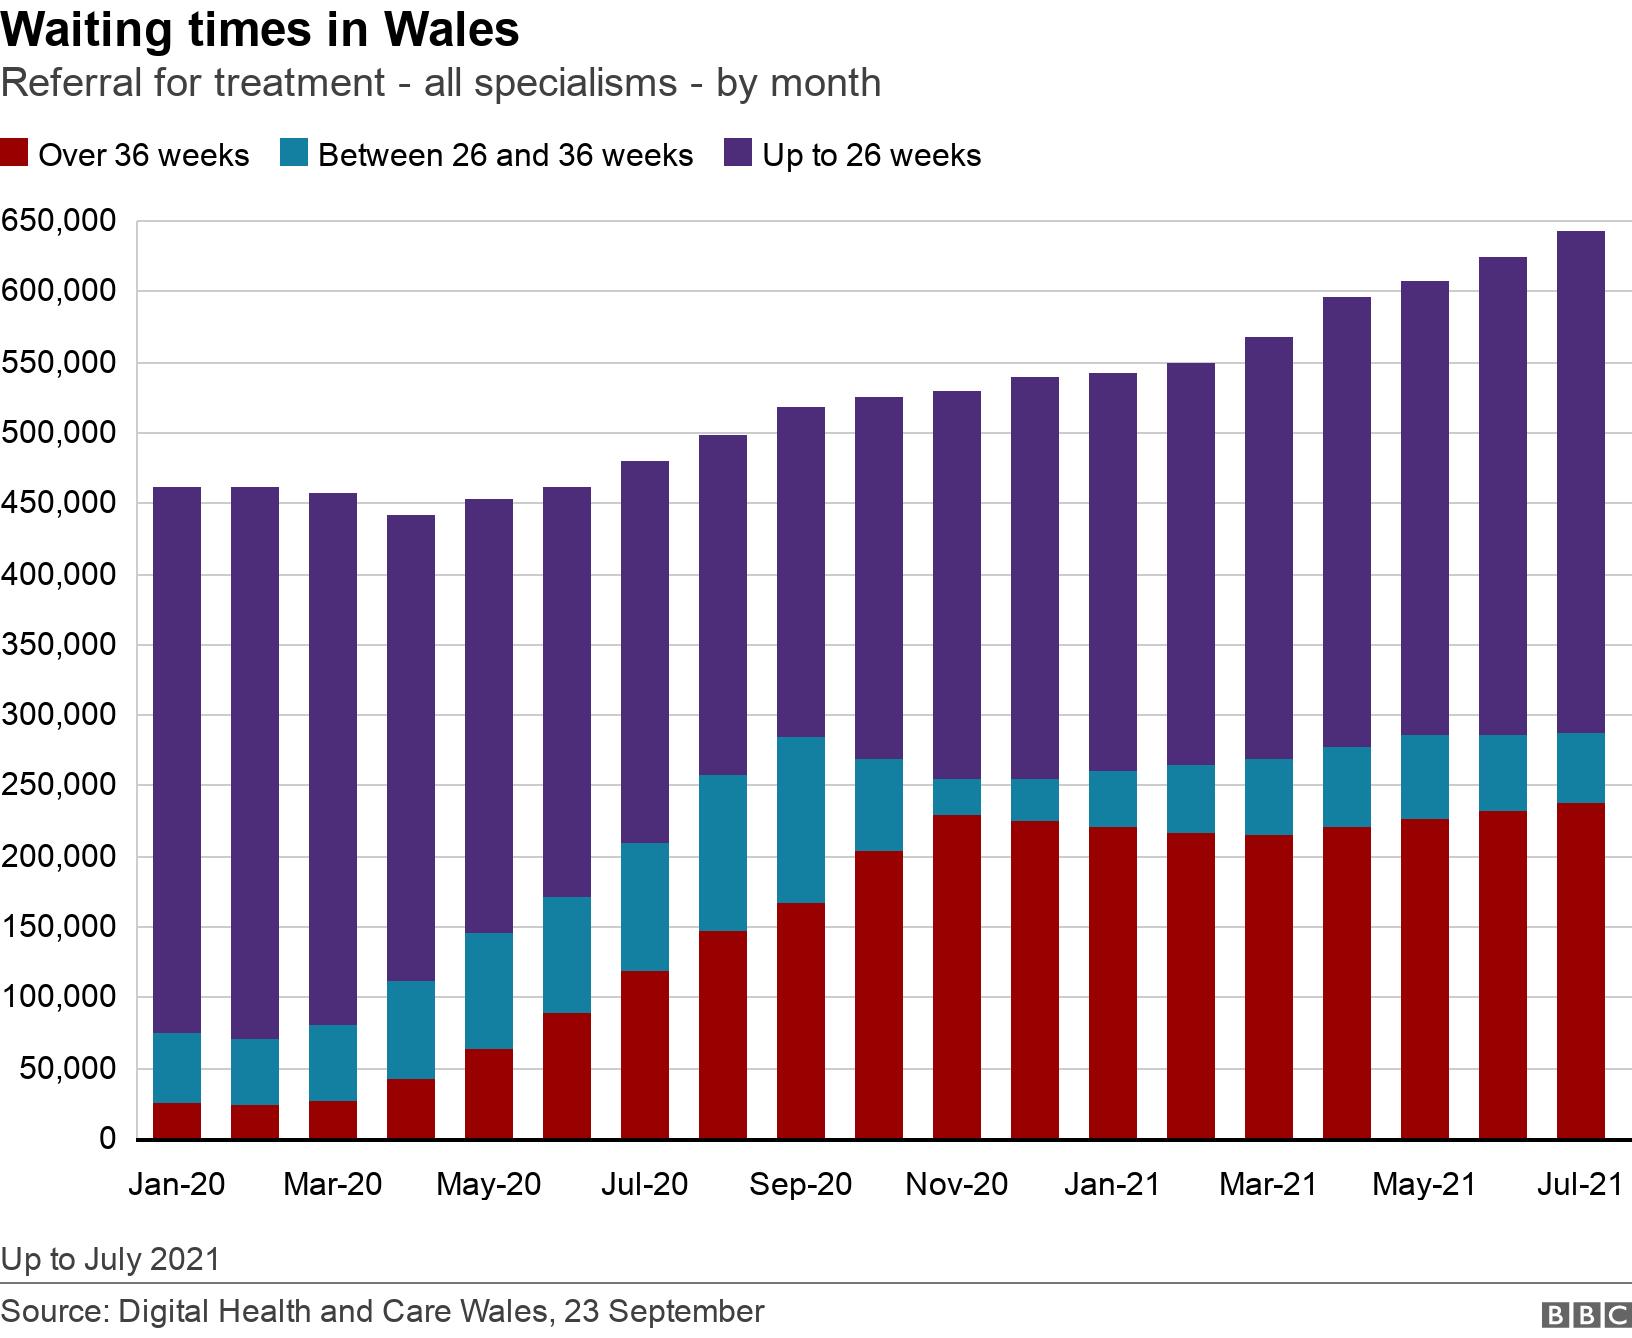 Waiting times in Wales. Referral for treatment - all specialisms - by month.  Up to July 2021.